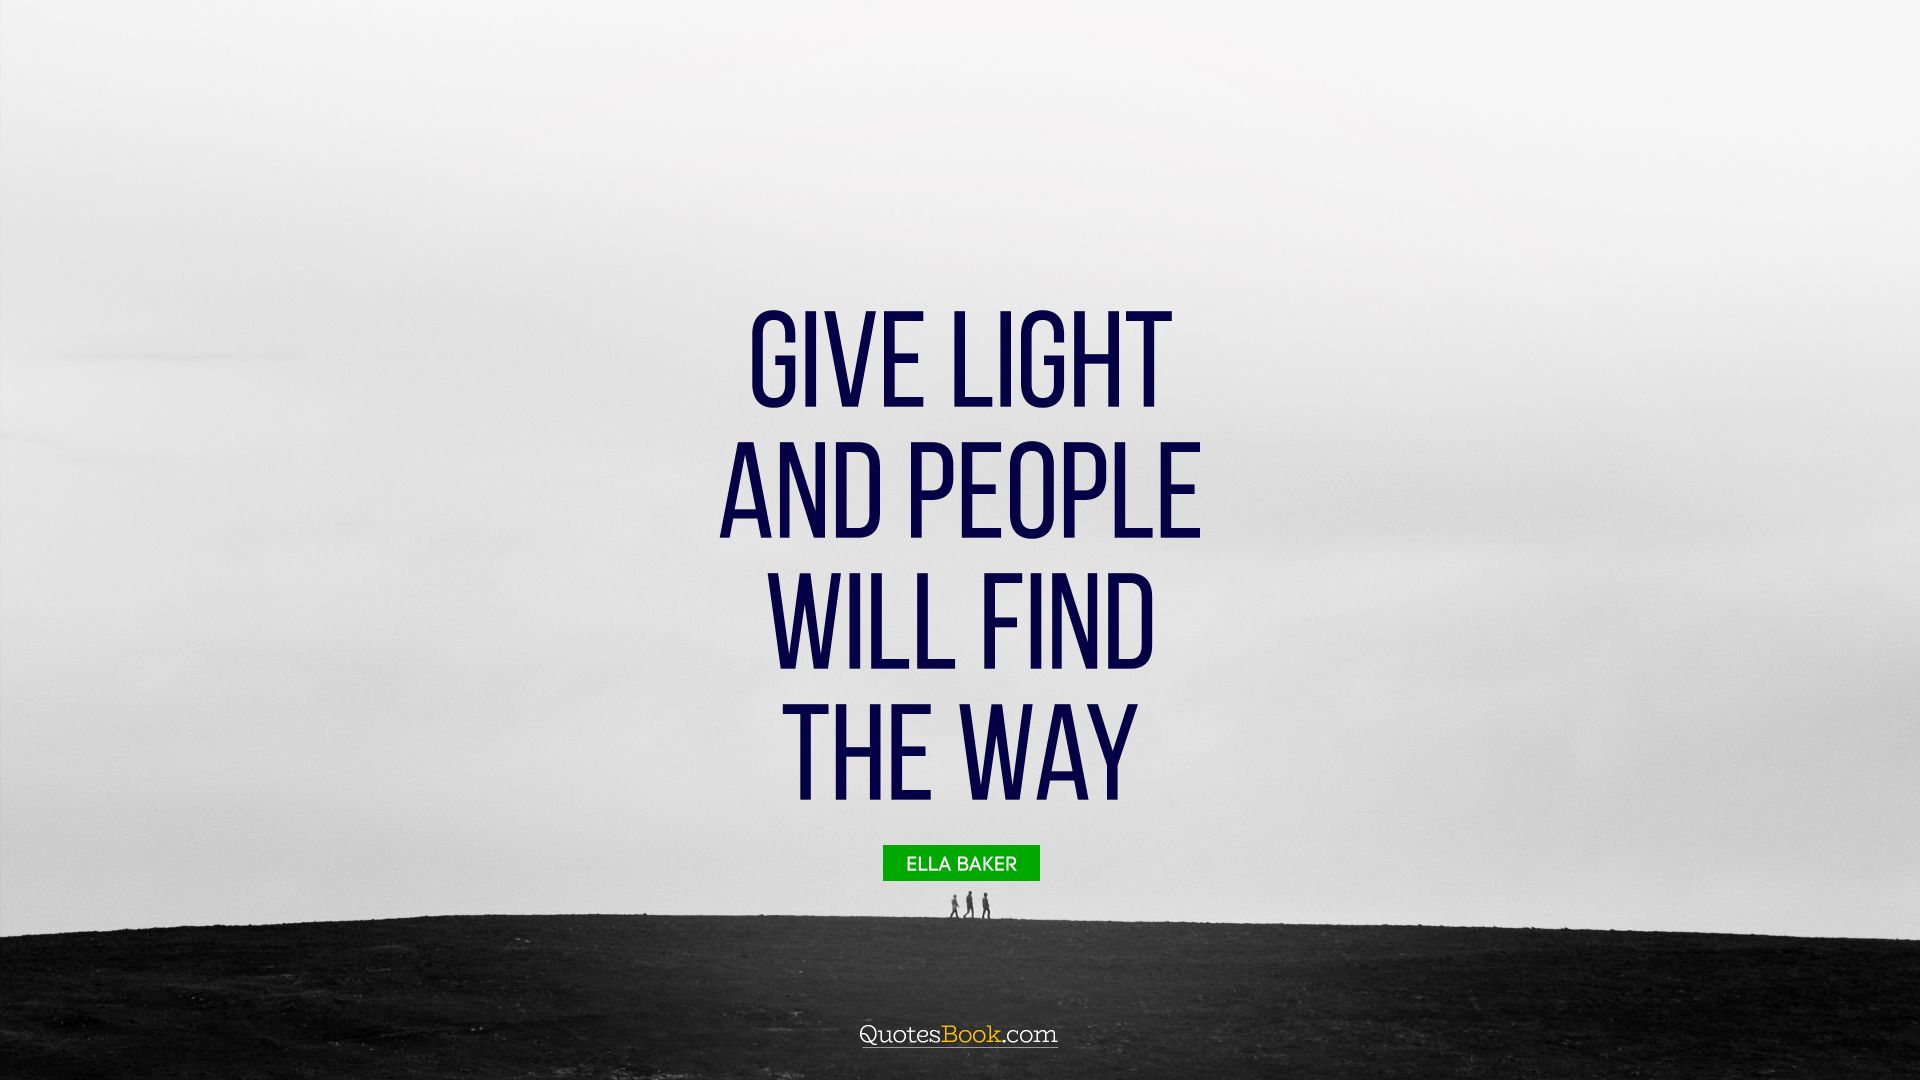 Give light and people will find the way. - Quote by Ella Baker